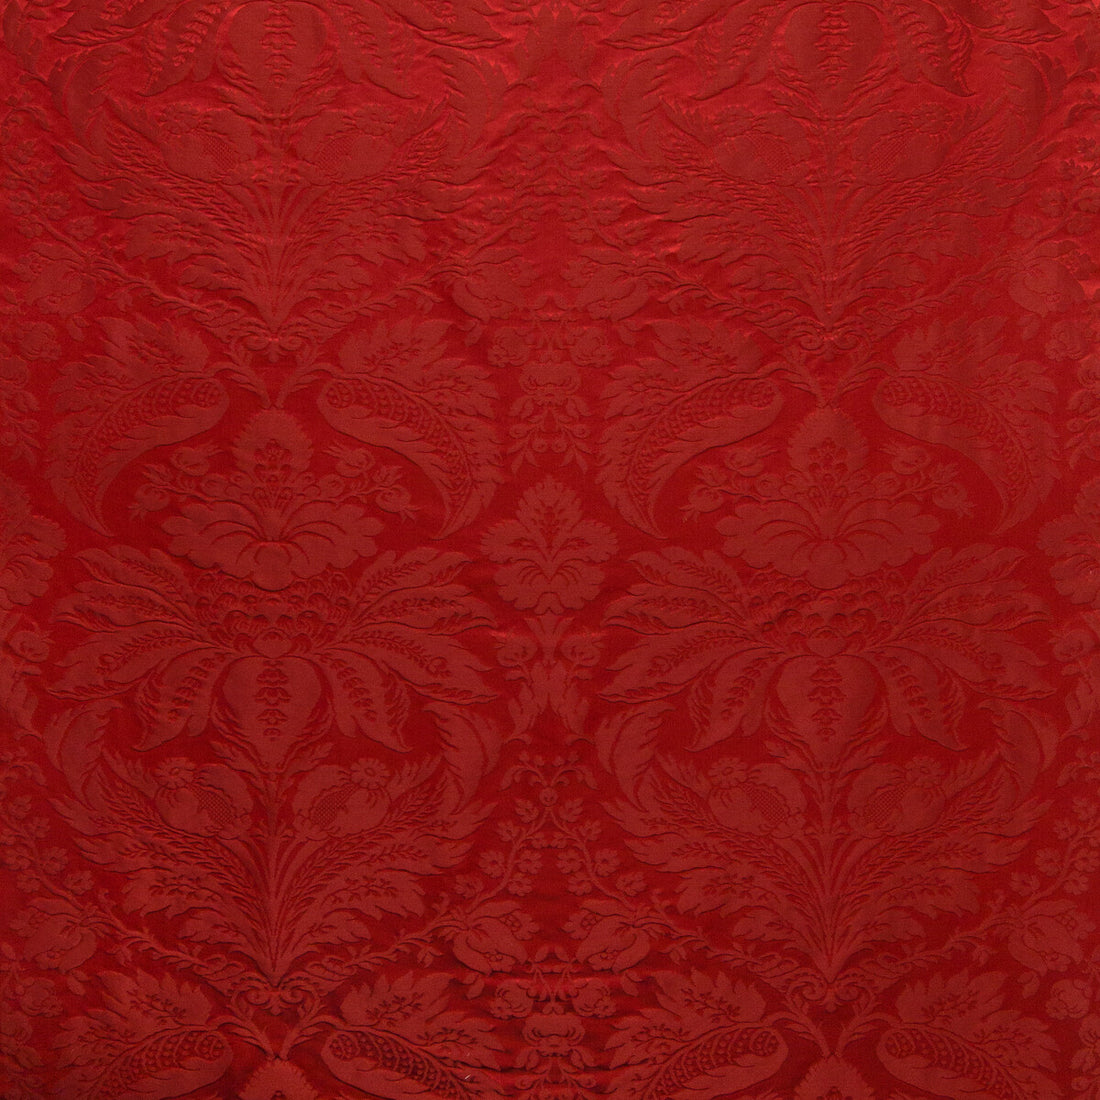 Damask Pierre fabric in red color - pattern 8013188.9.0 - by Brunschwig &amp; Fils in the B&amp;F Showroom Exclusive 2019 collection